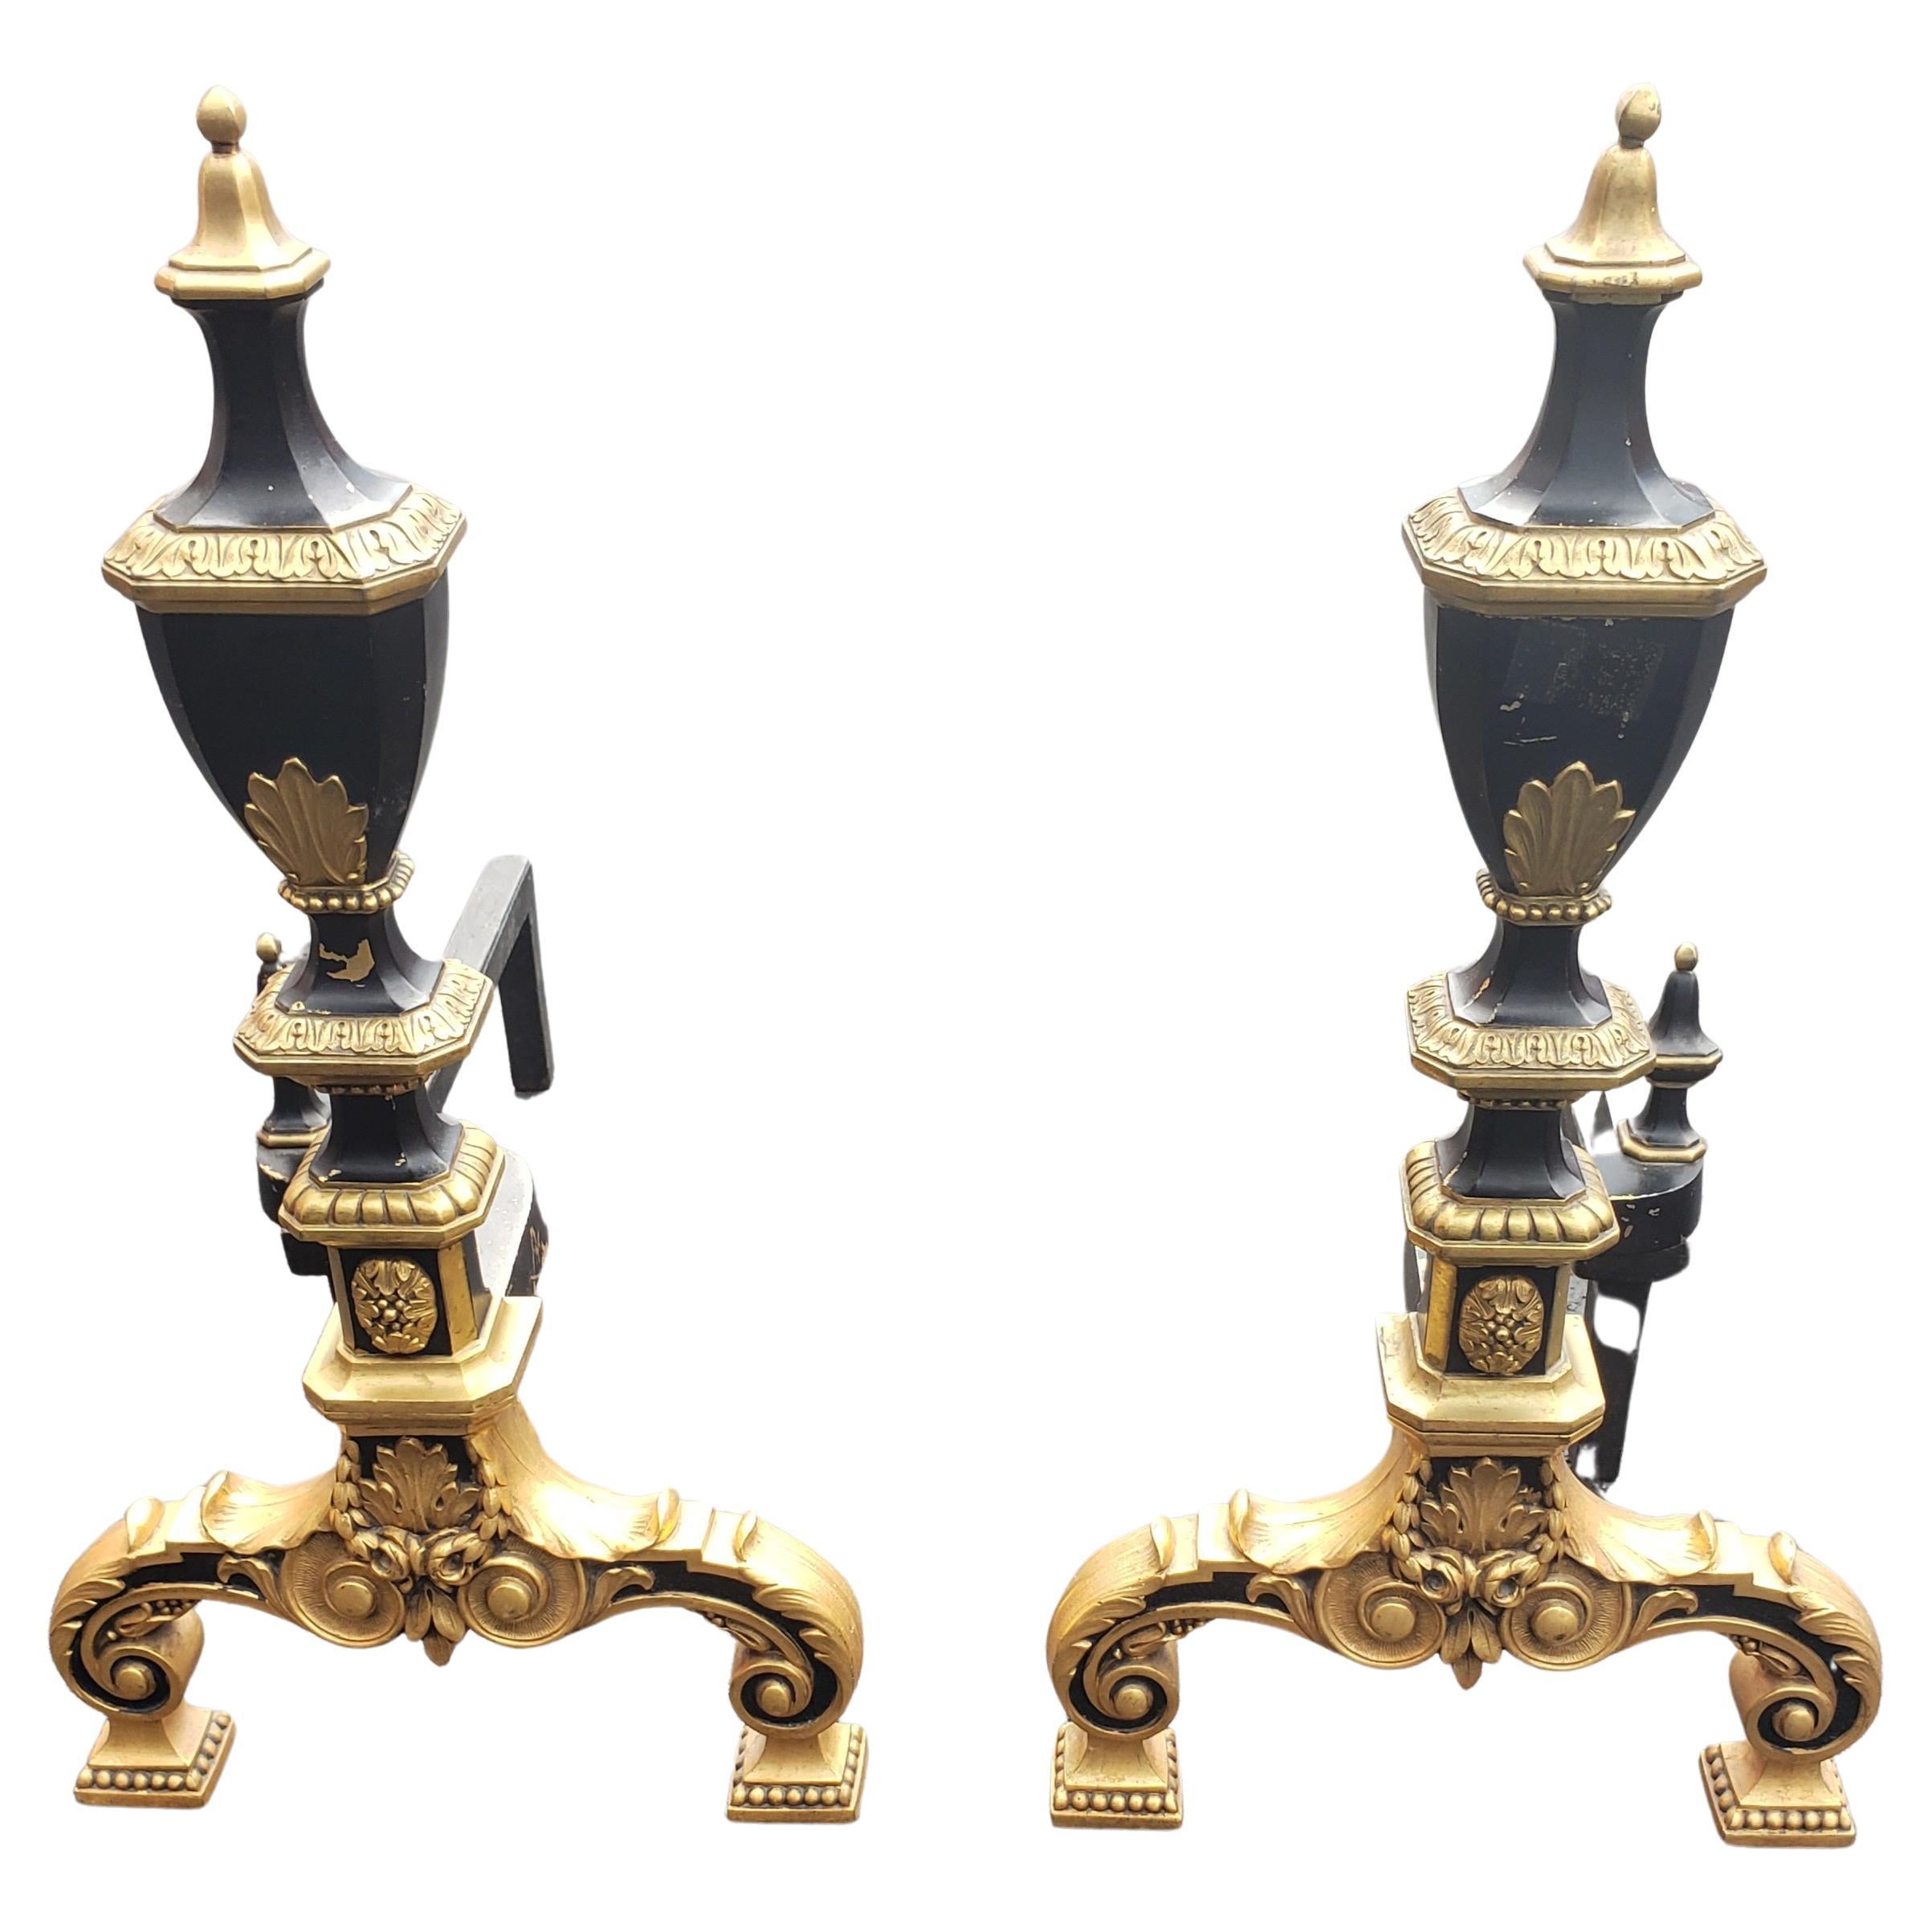 Absolutely gorgeous pair of 1908 Signed WM. H. Jackson Gilt Bronze Ornate Andirons. Trophy like finials and Bronze ornate with paw feet. 
Good antique condition with wear appropriate with age and use. 
Measures 10